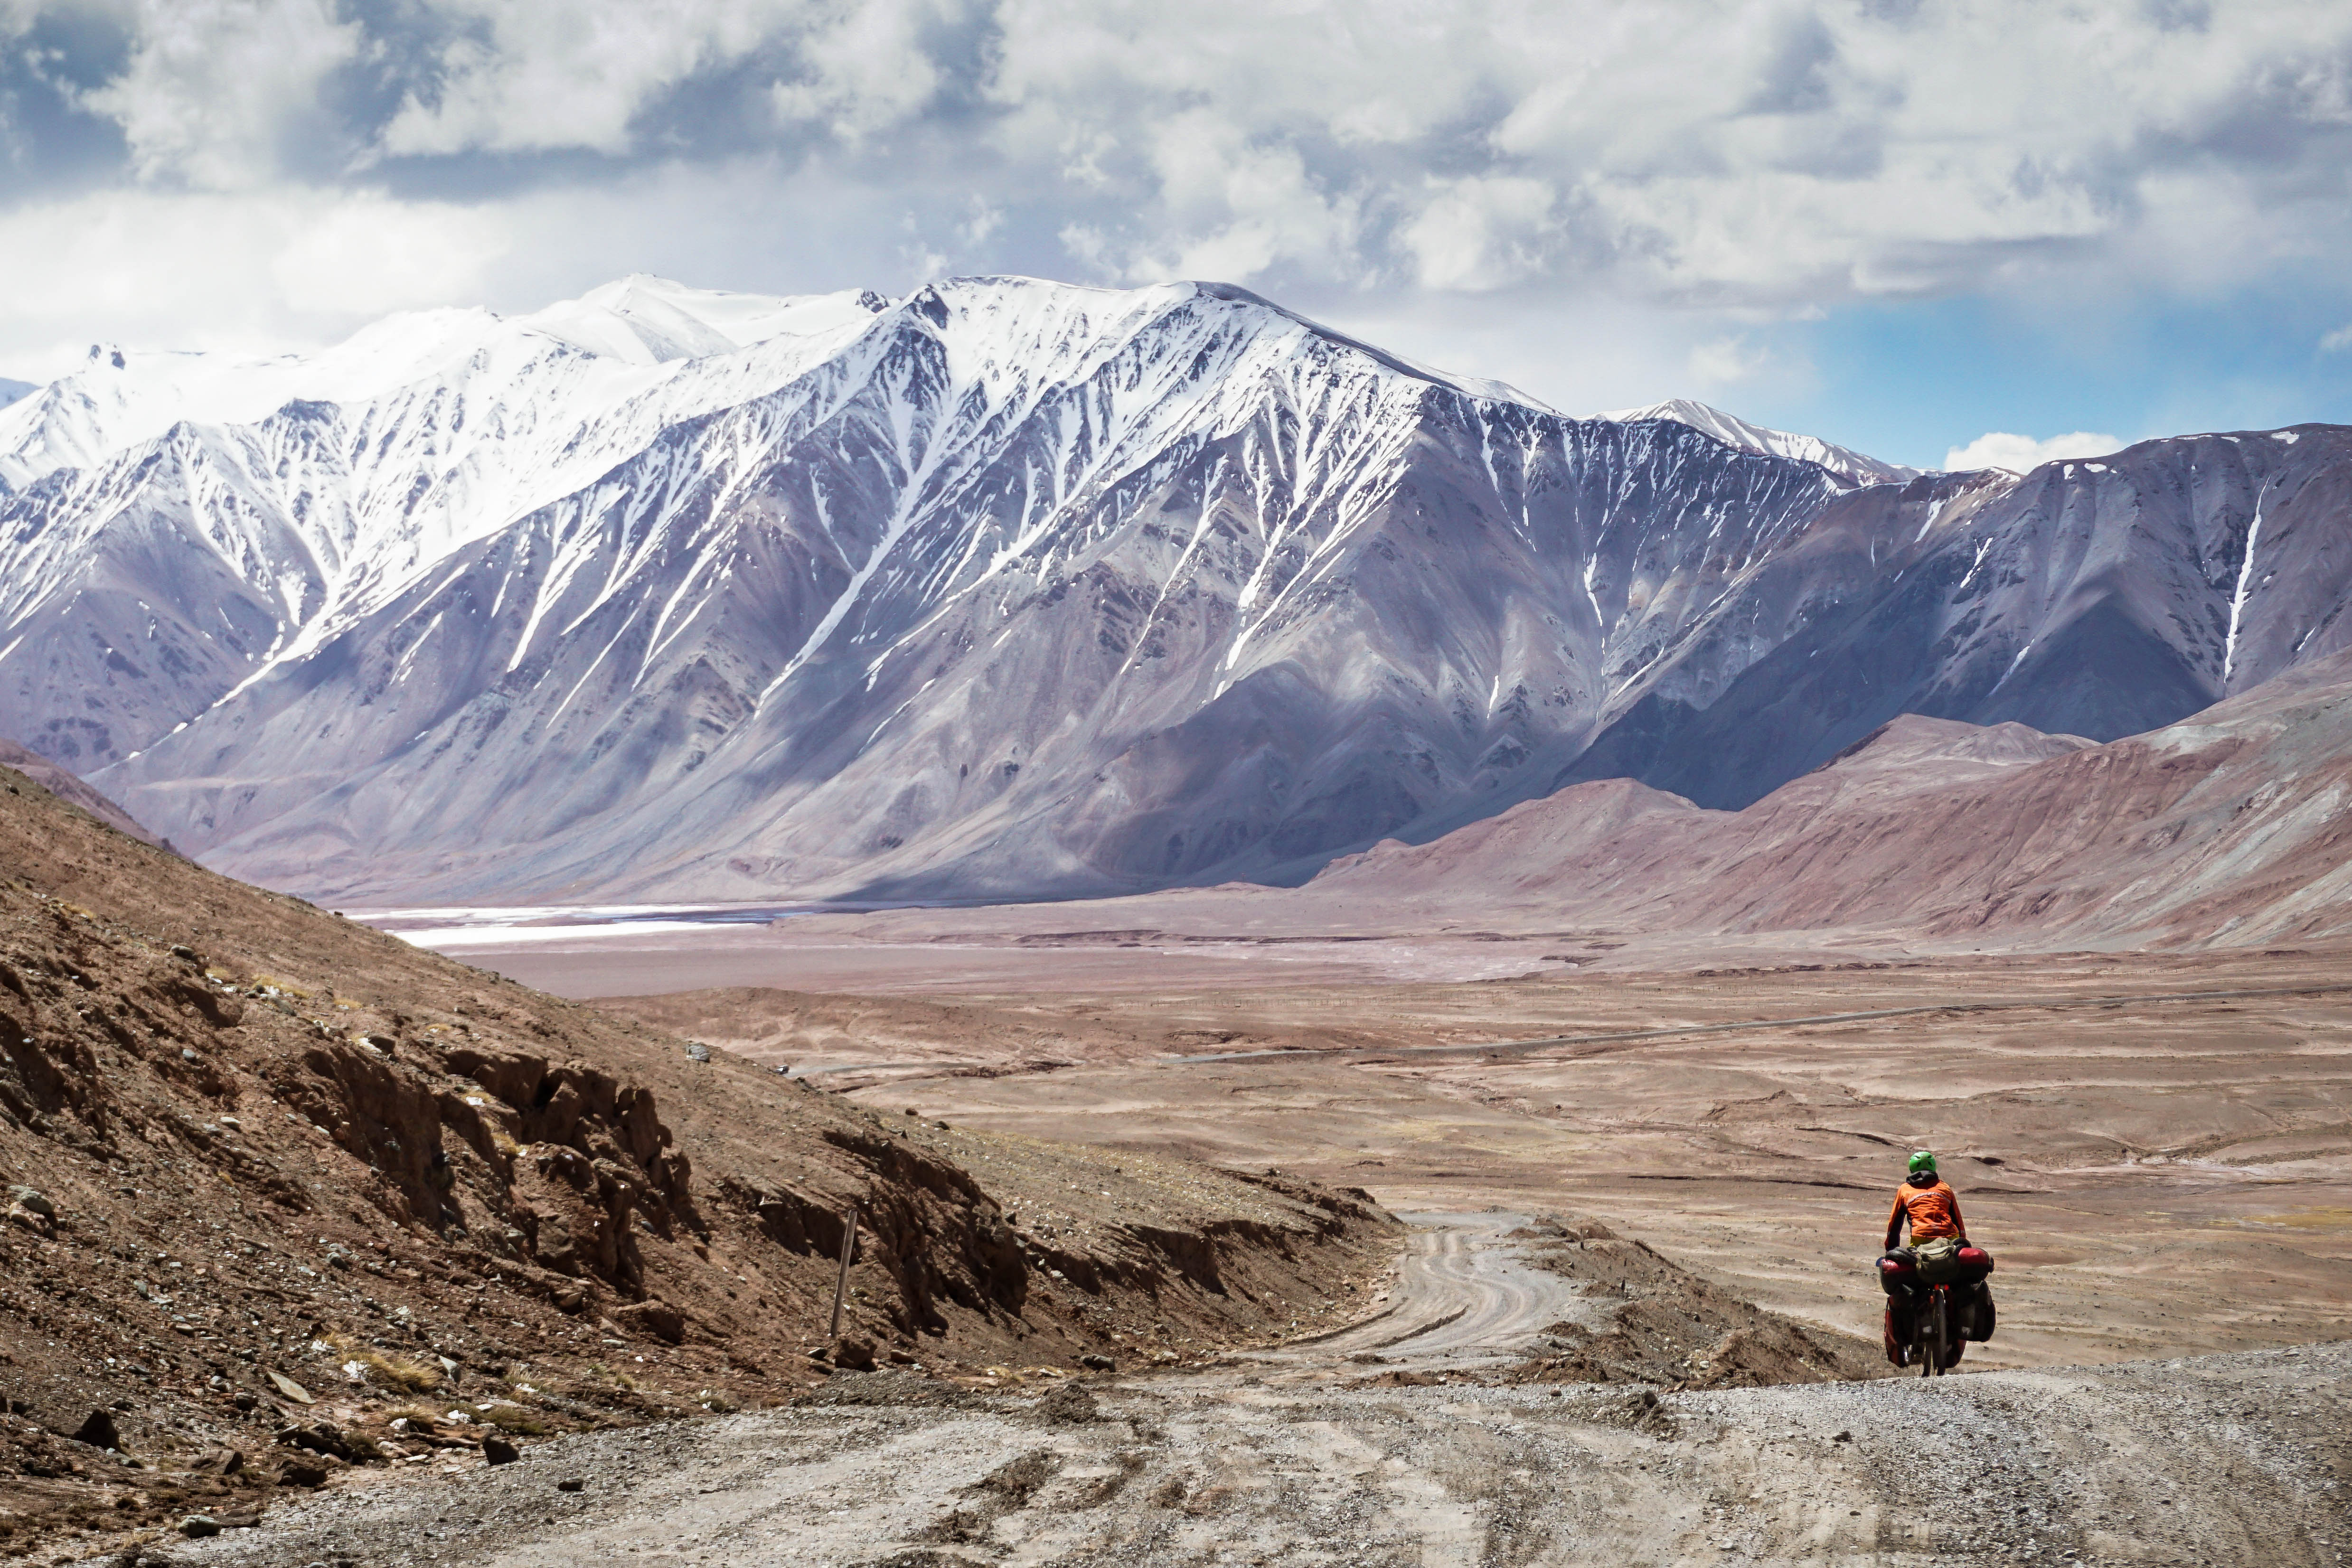 Tackling a rough section of the remote Pamir Highway.